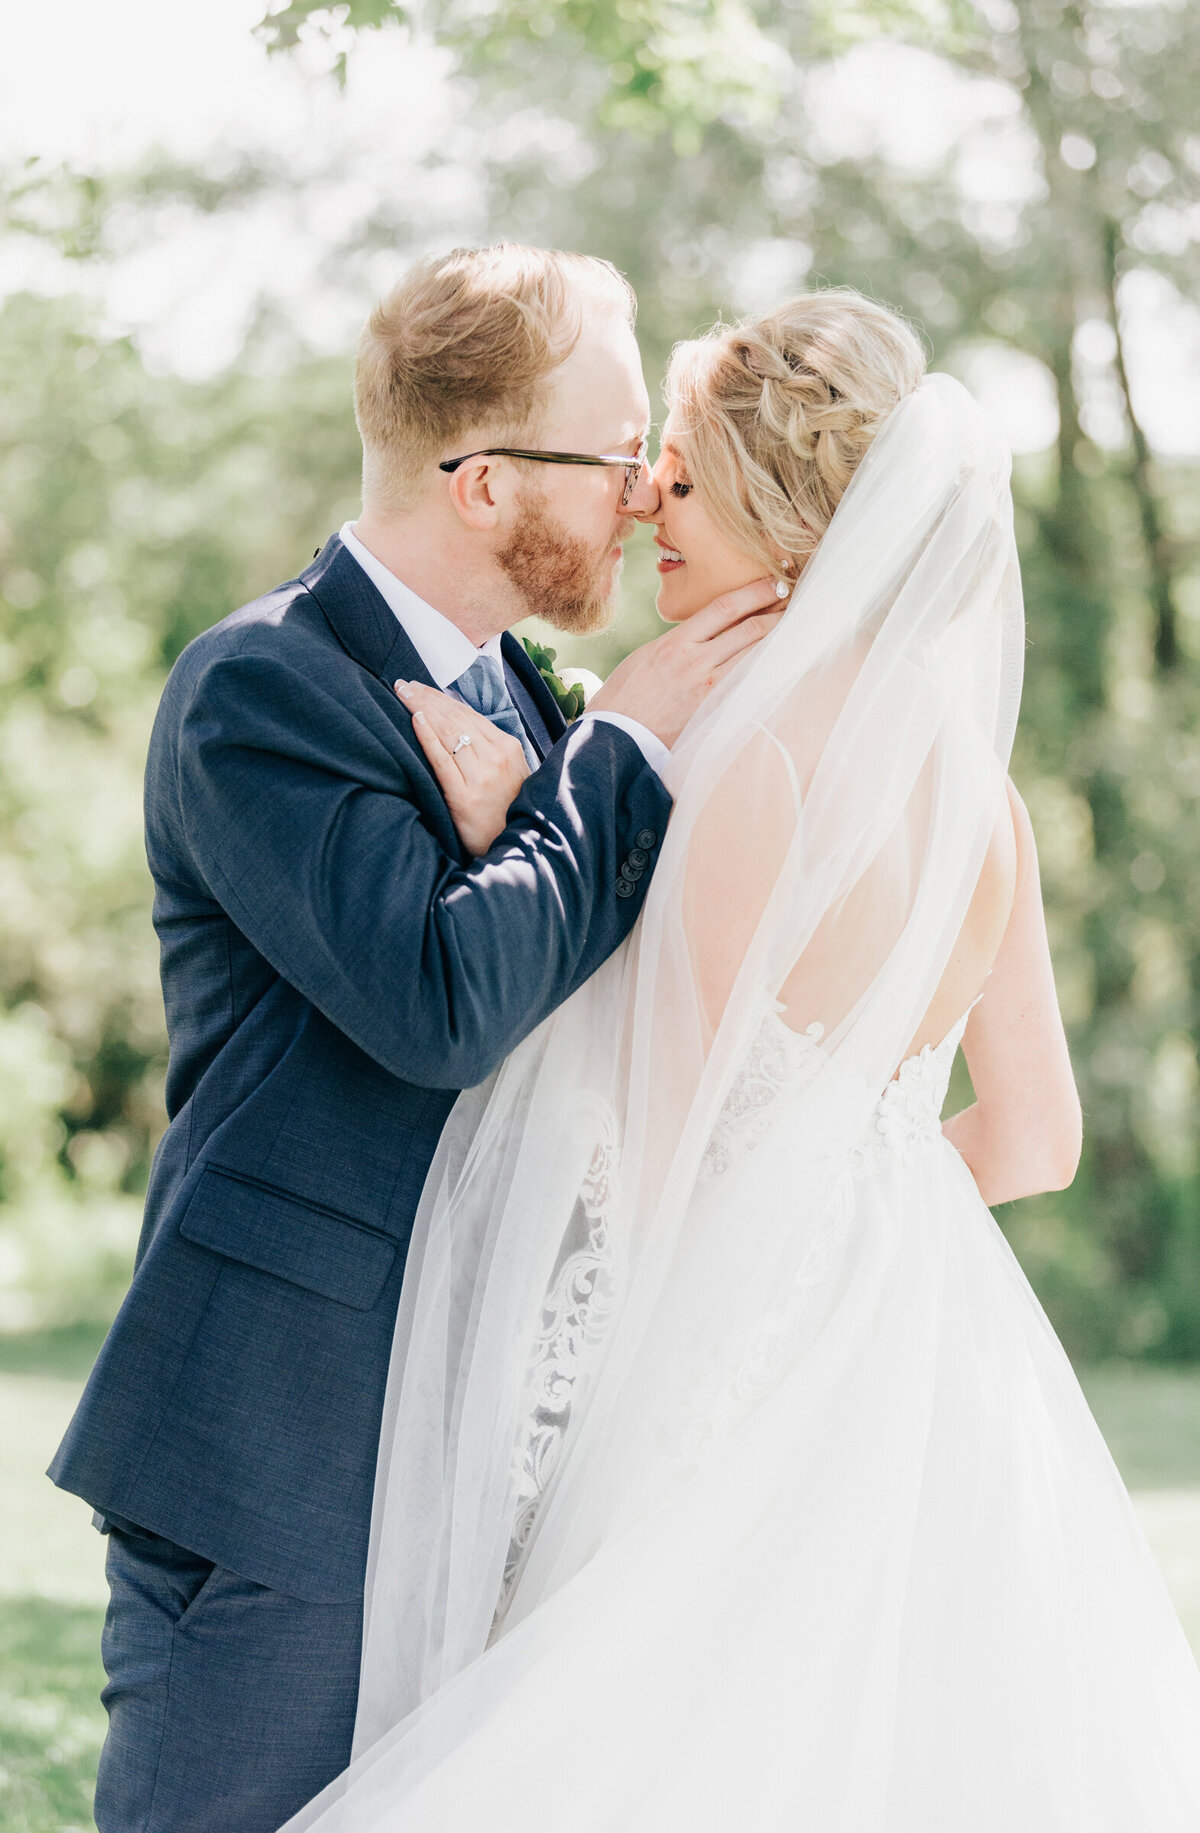 Glamorous wedding portraits of bride and groom kissing, bride's veil flowing in the wind